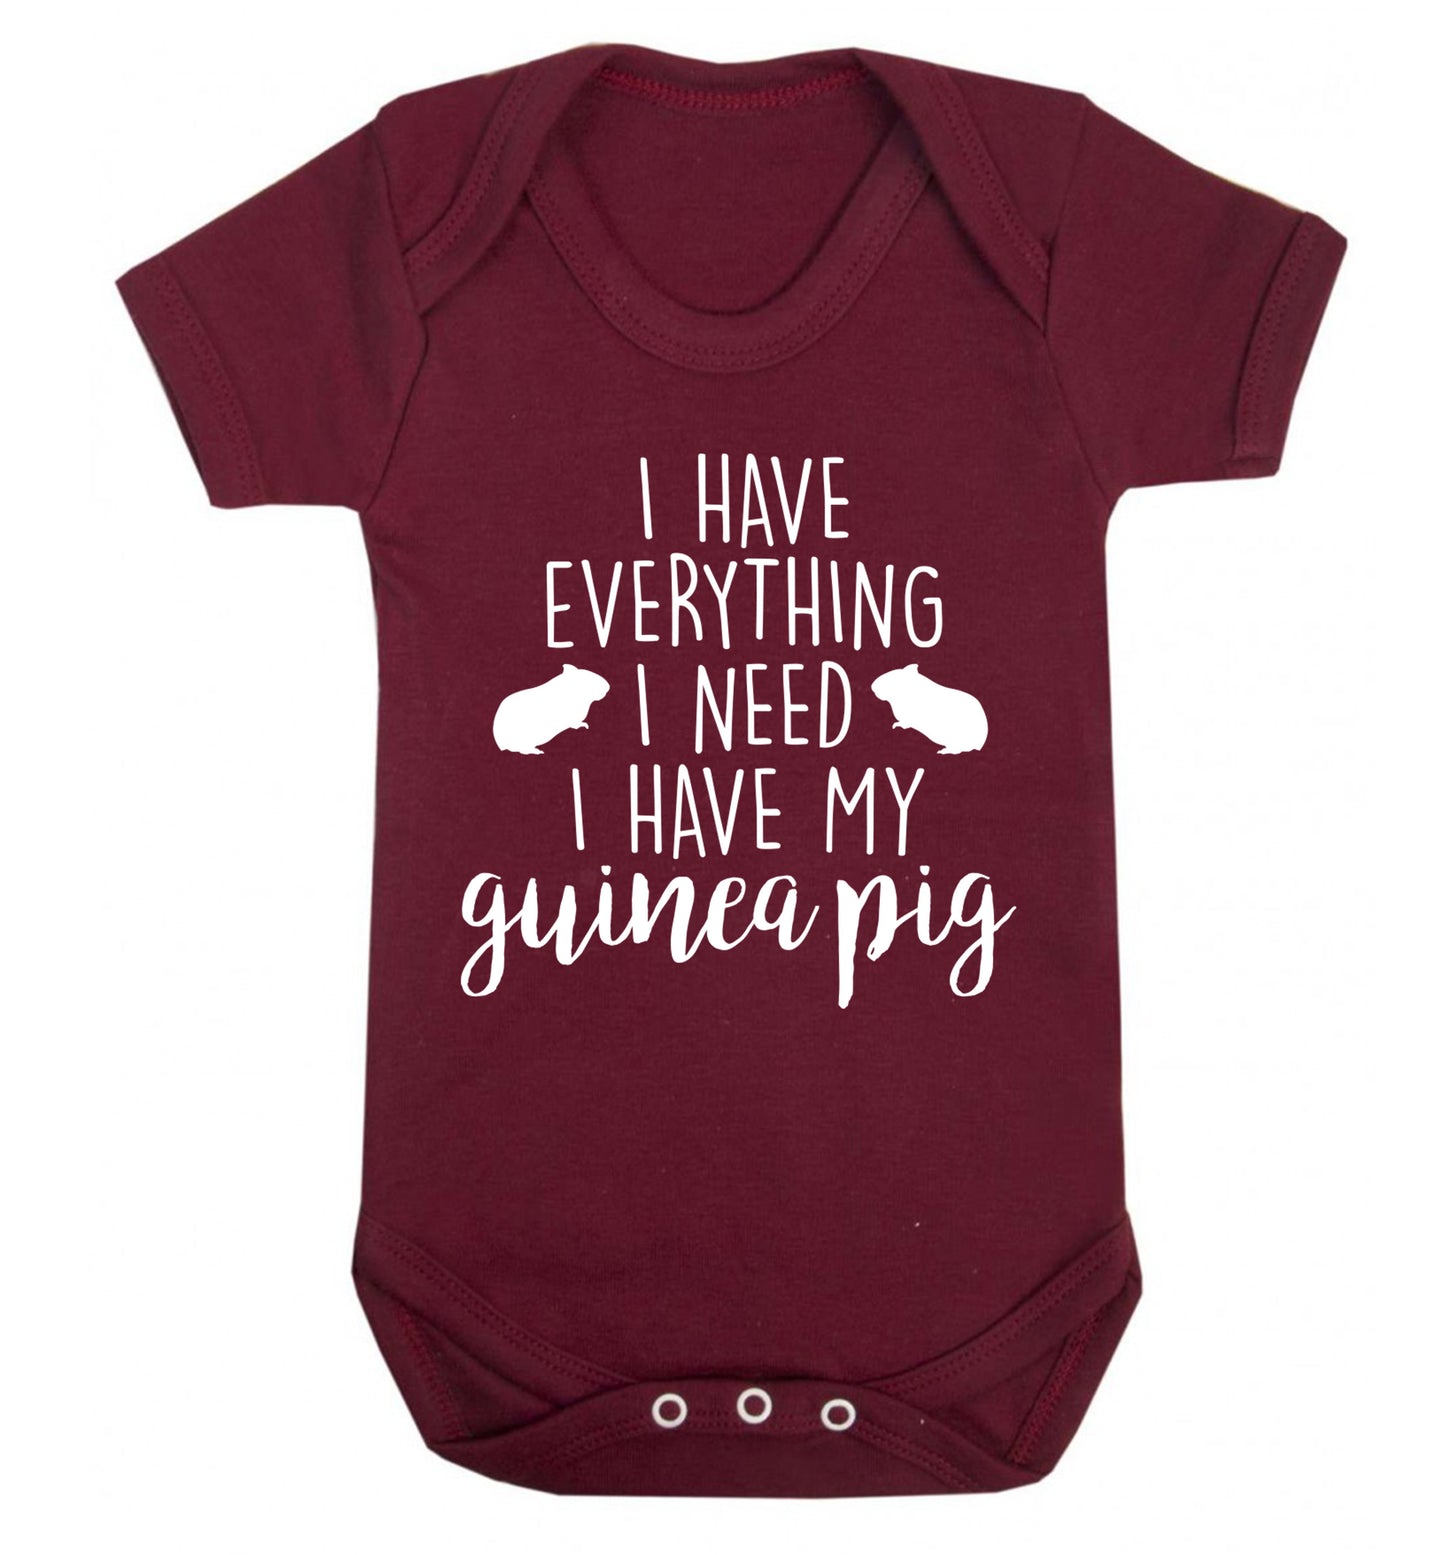 I have everything I need, I have my guinea pig Baby Vest maroon 18-24 months